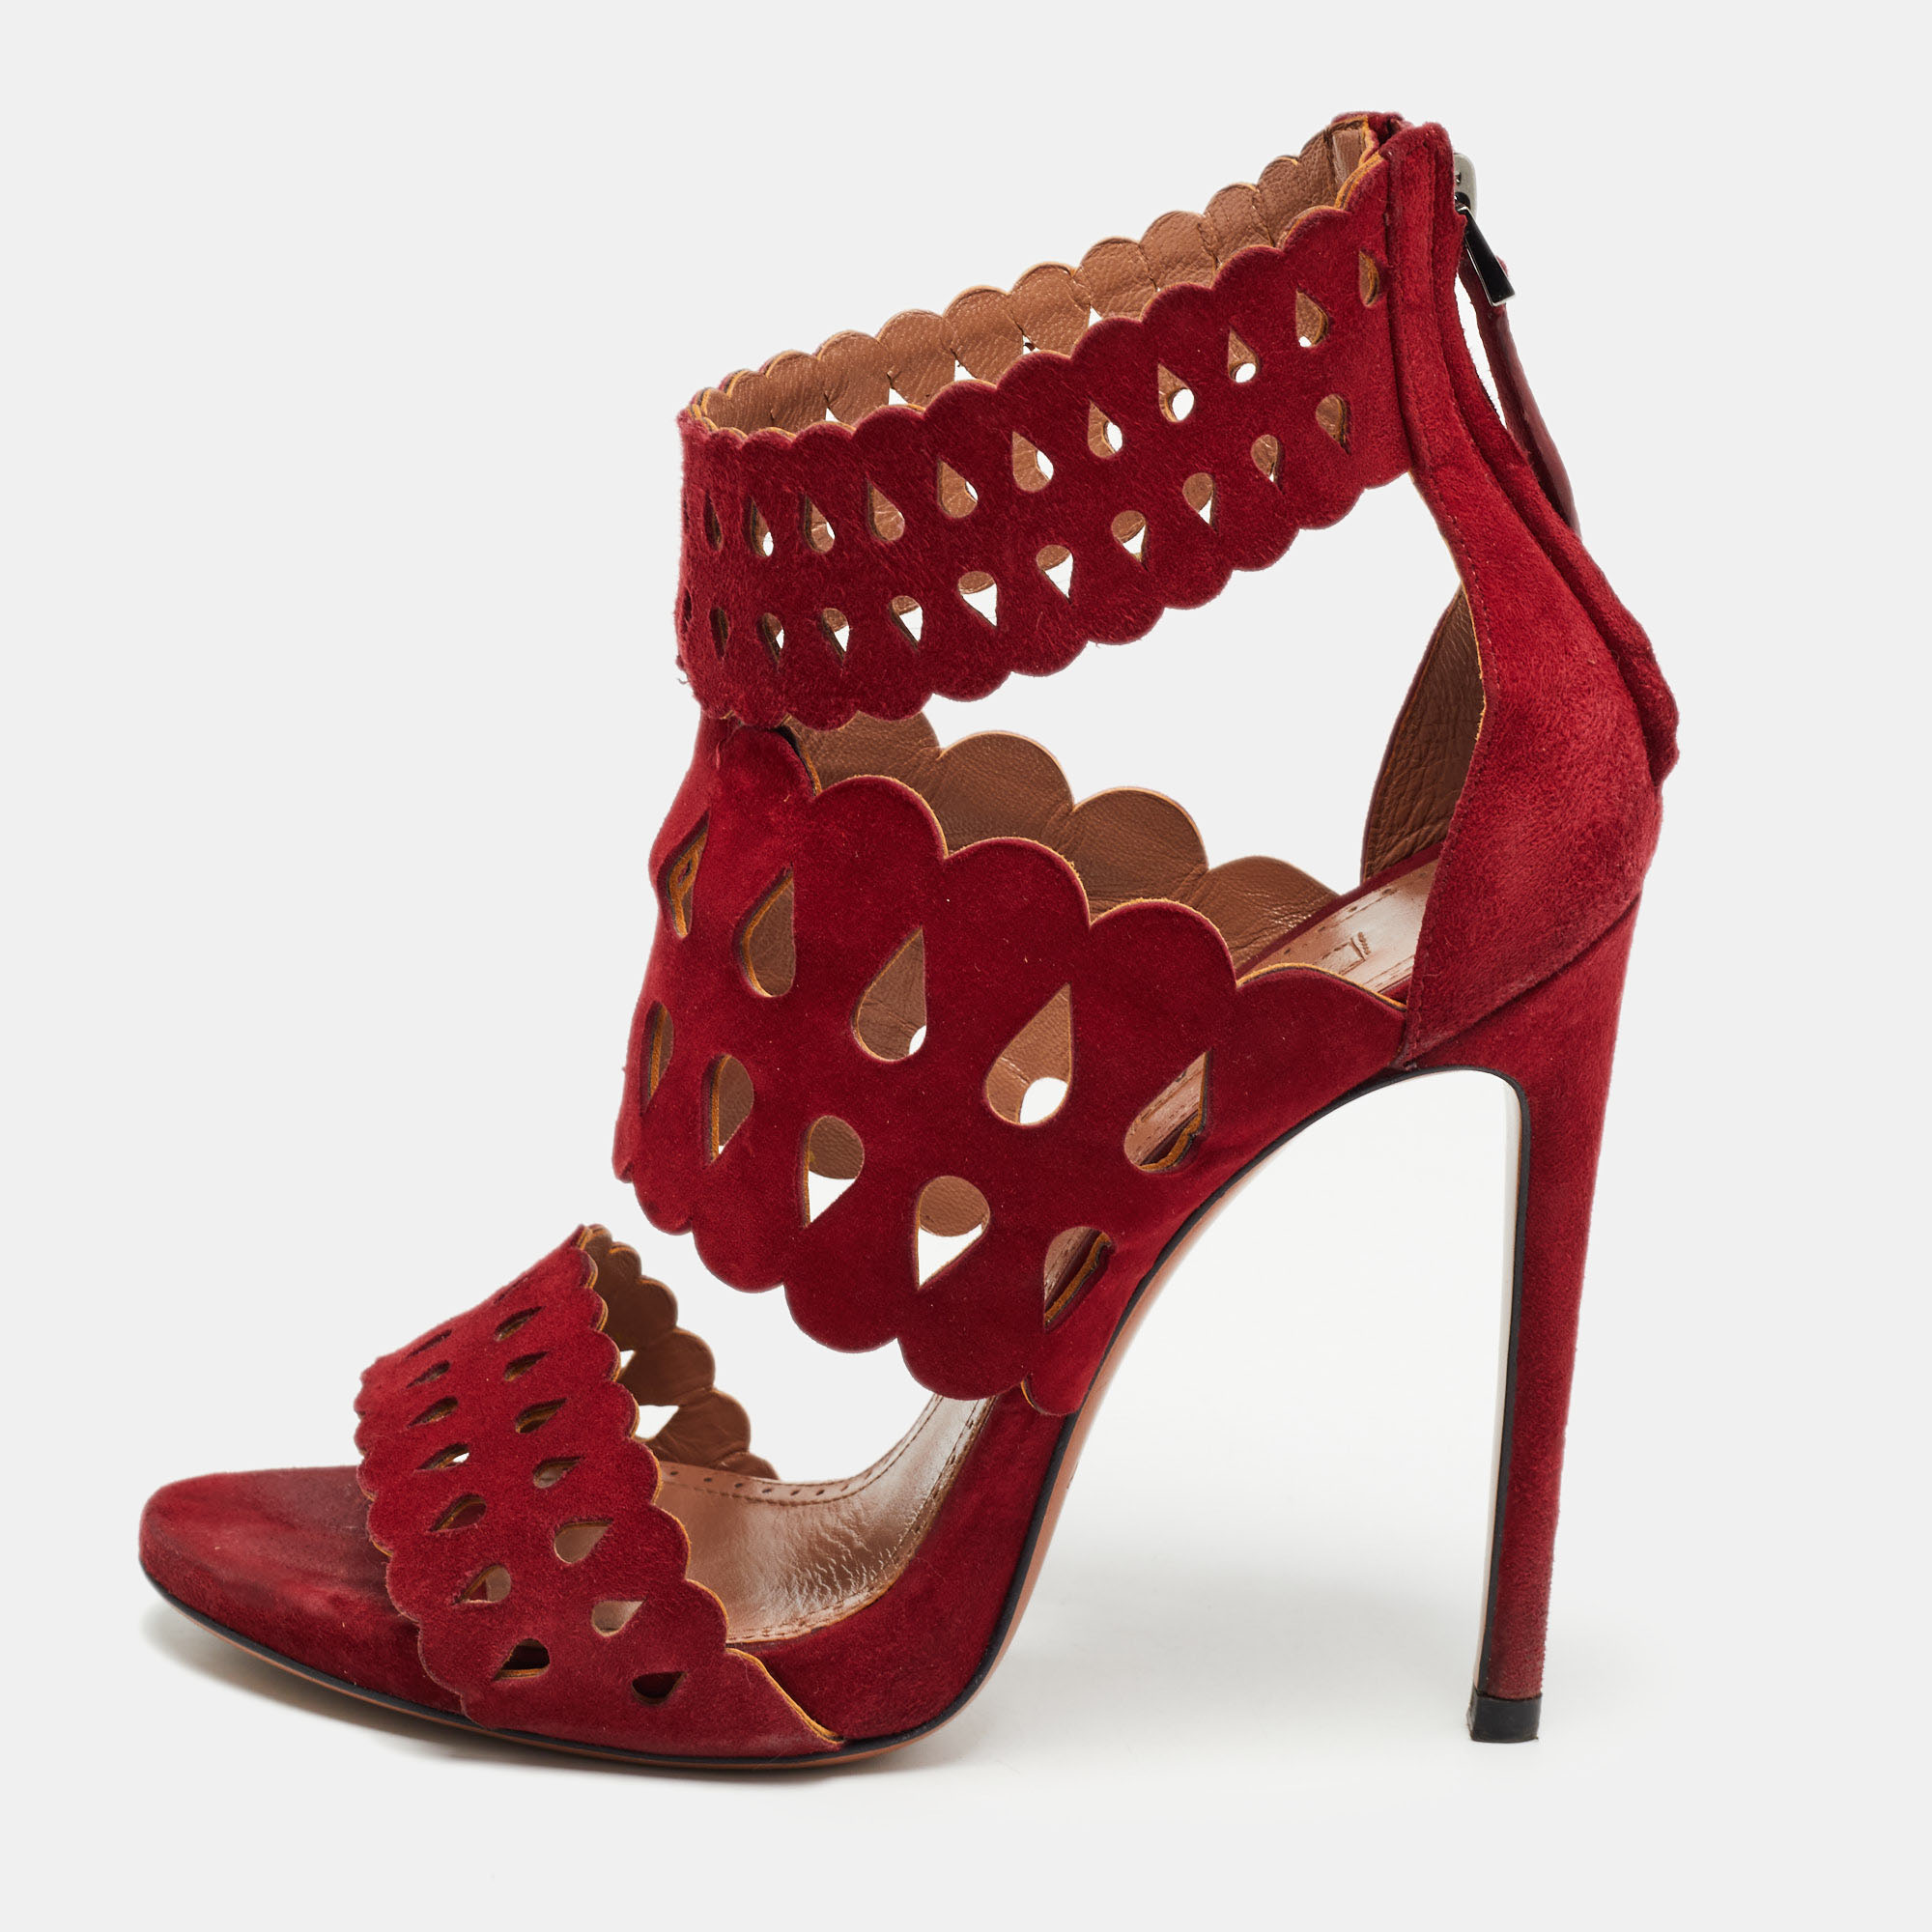 Pre-owned Alaïa Burgundy Suede Laser Cut Out Ankle Cuff Sandals Size 36